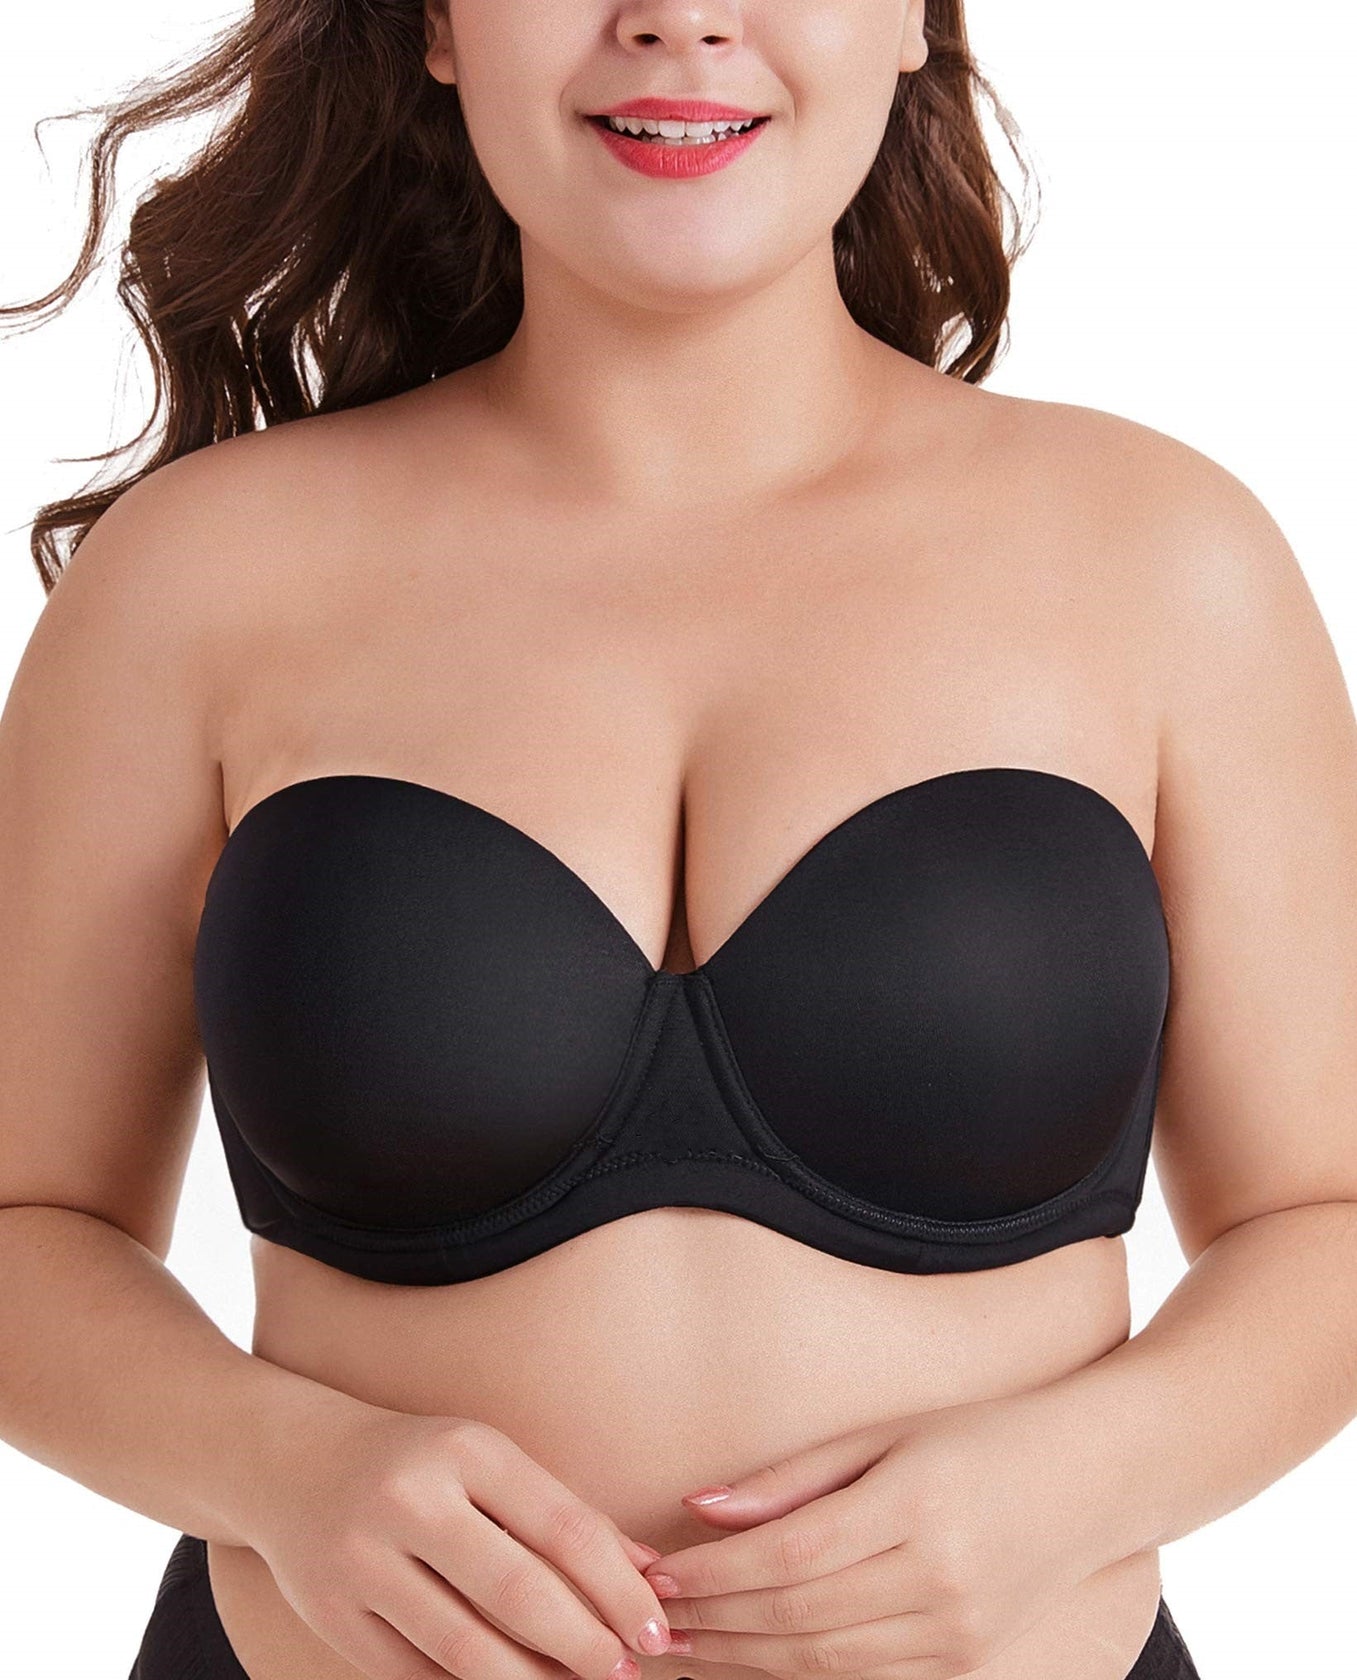 Young Beautiful Plus Size Modelt in Black Bra Holding Mannequin